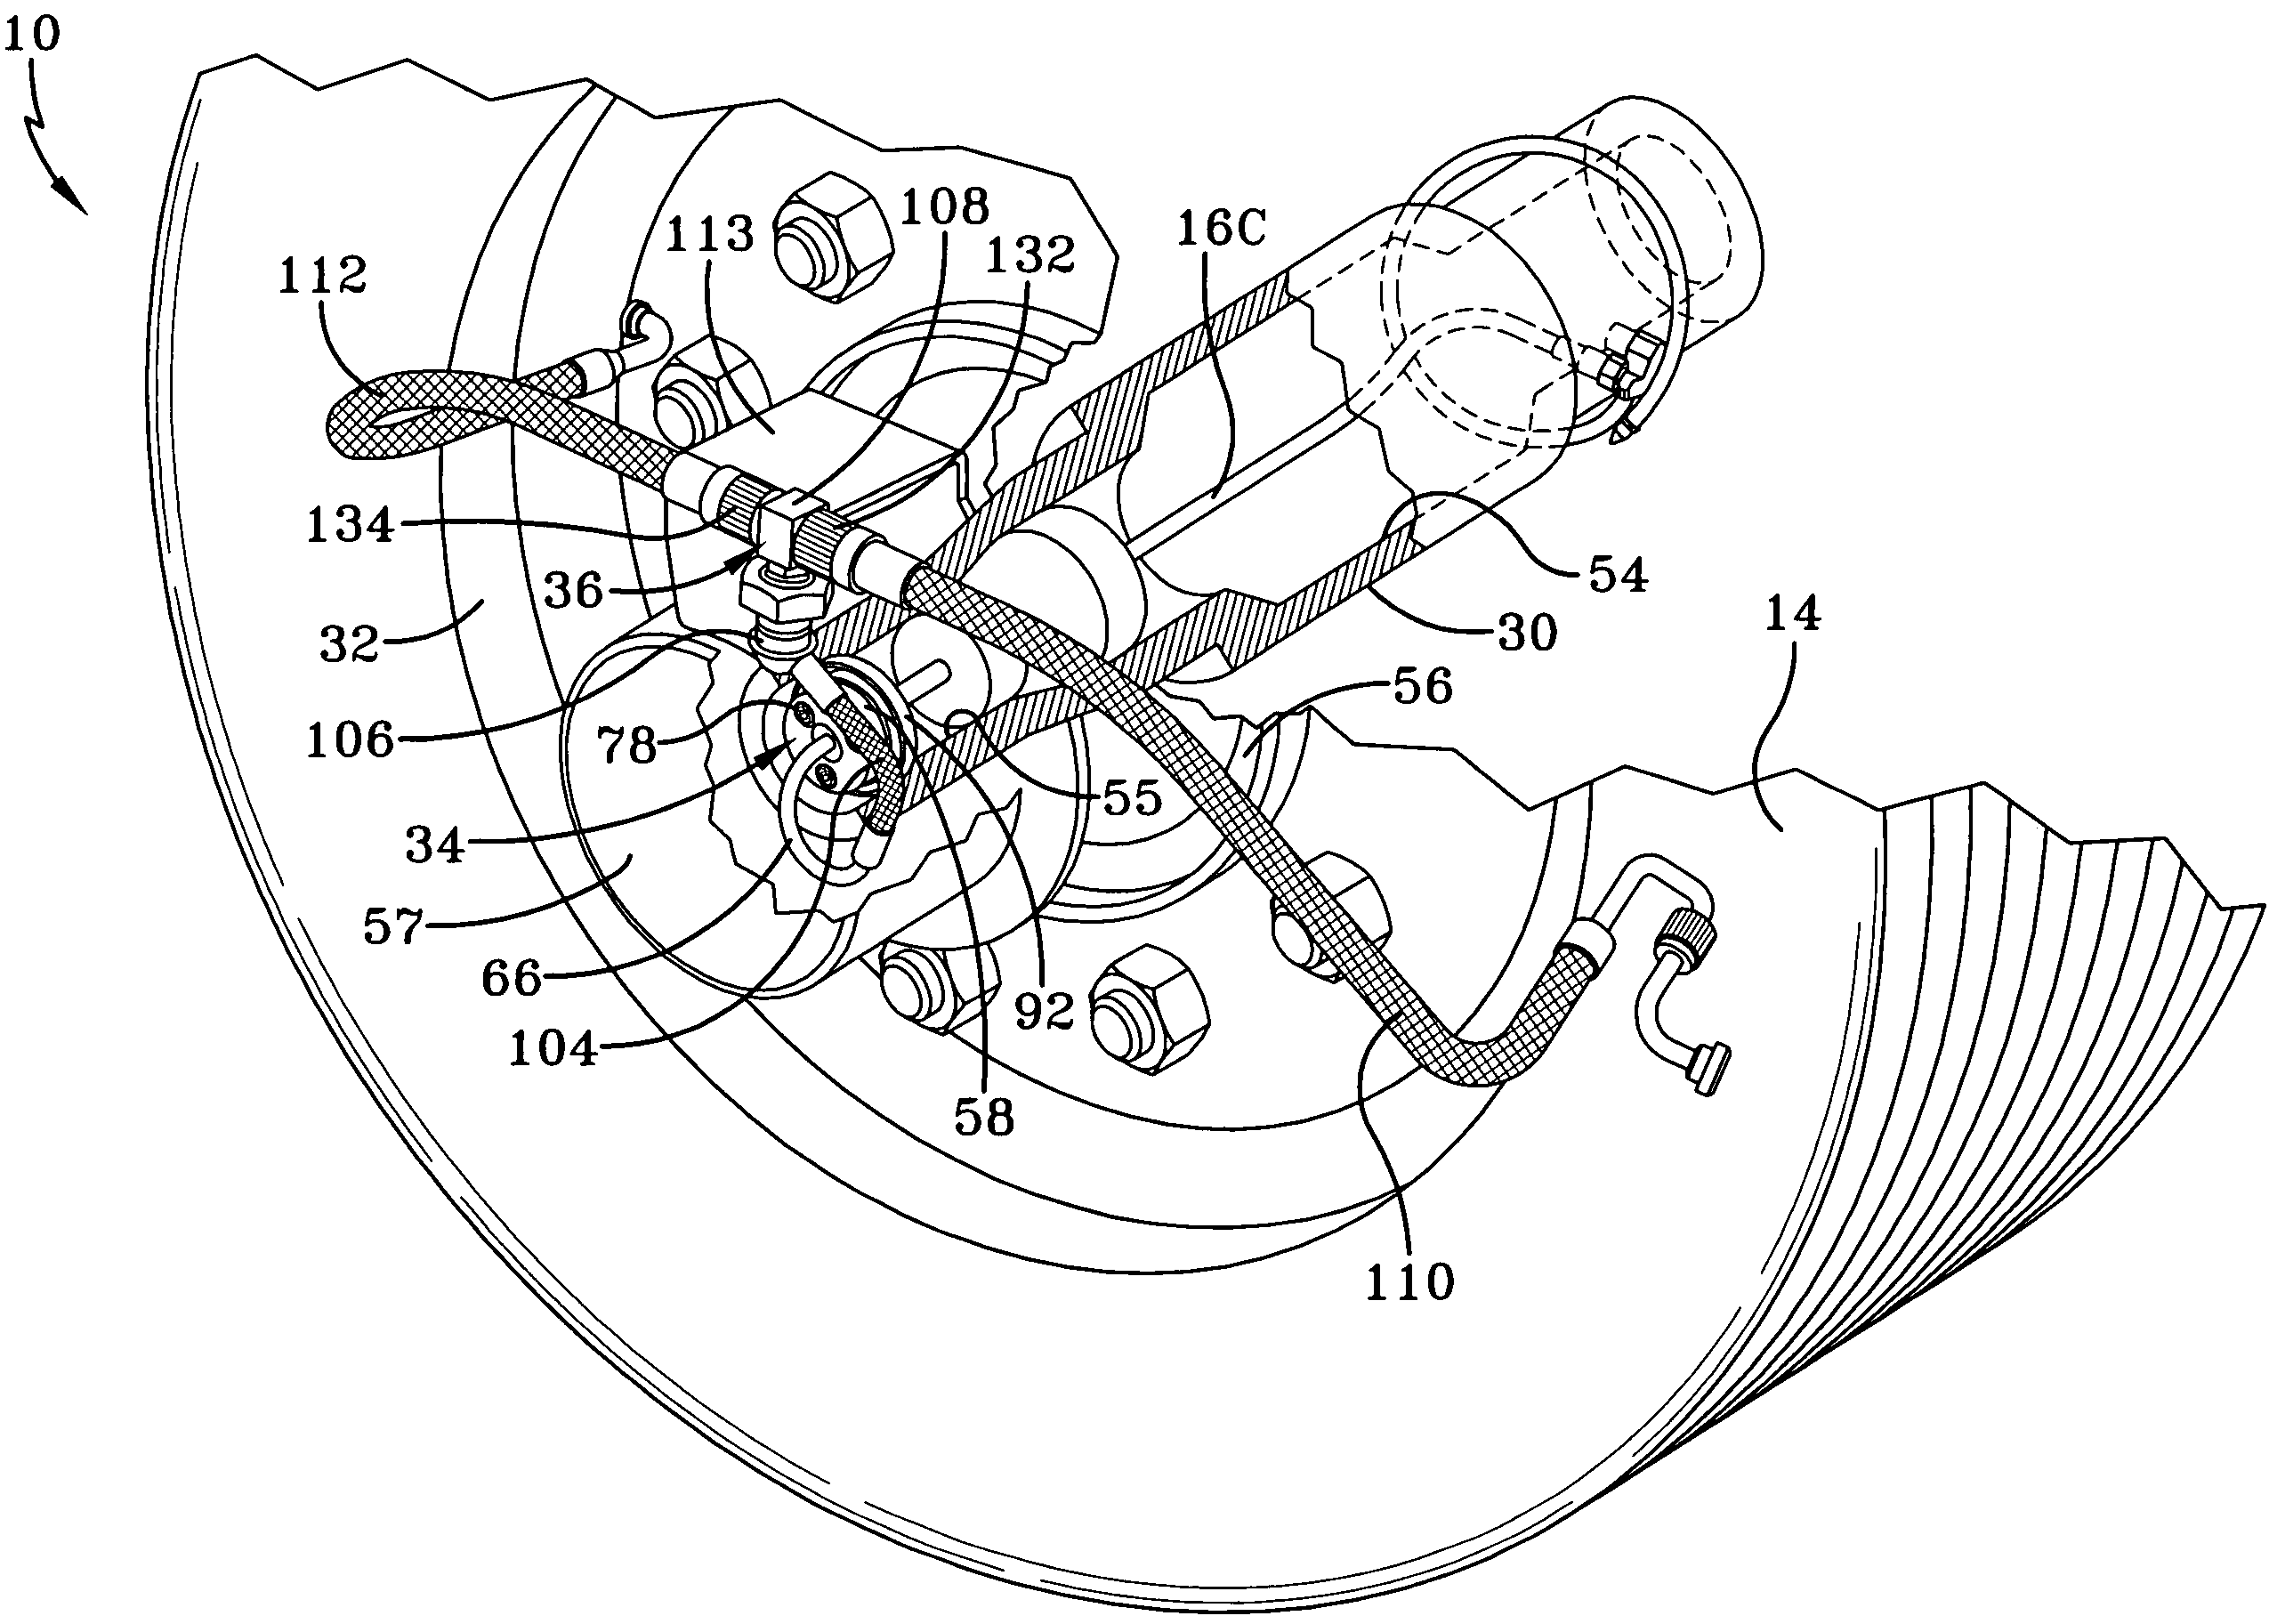 Tire inflation system apparatus and method